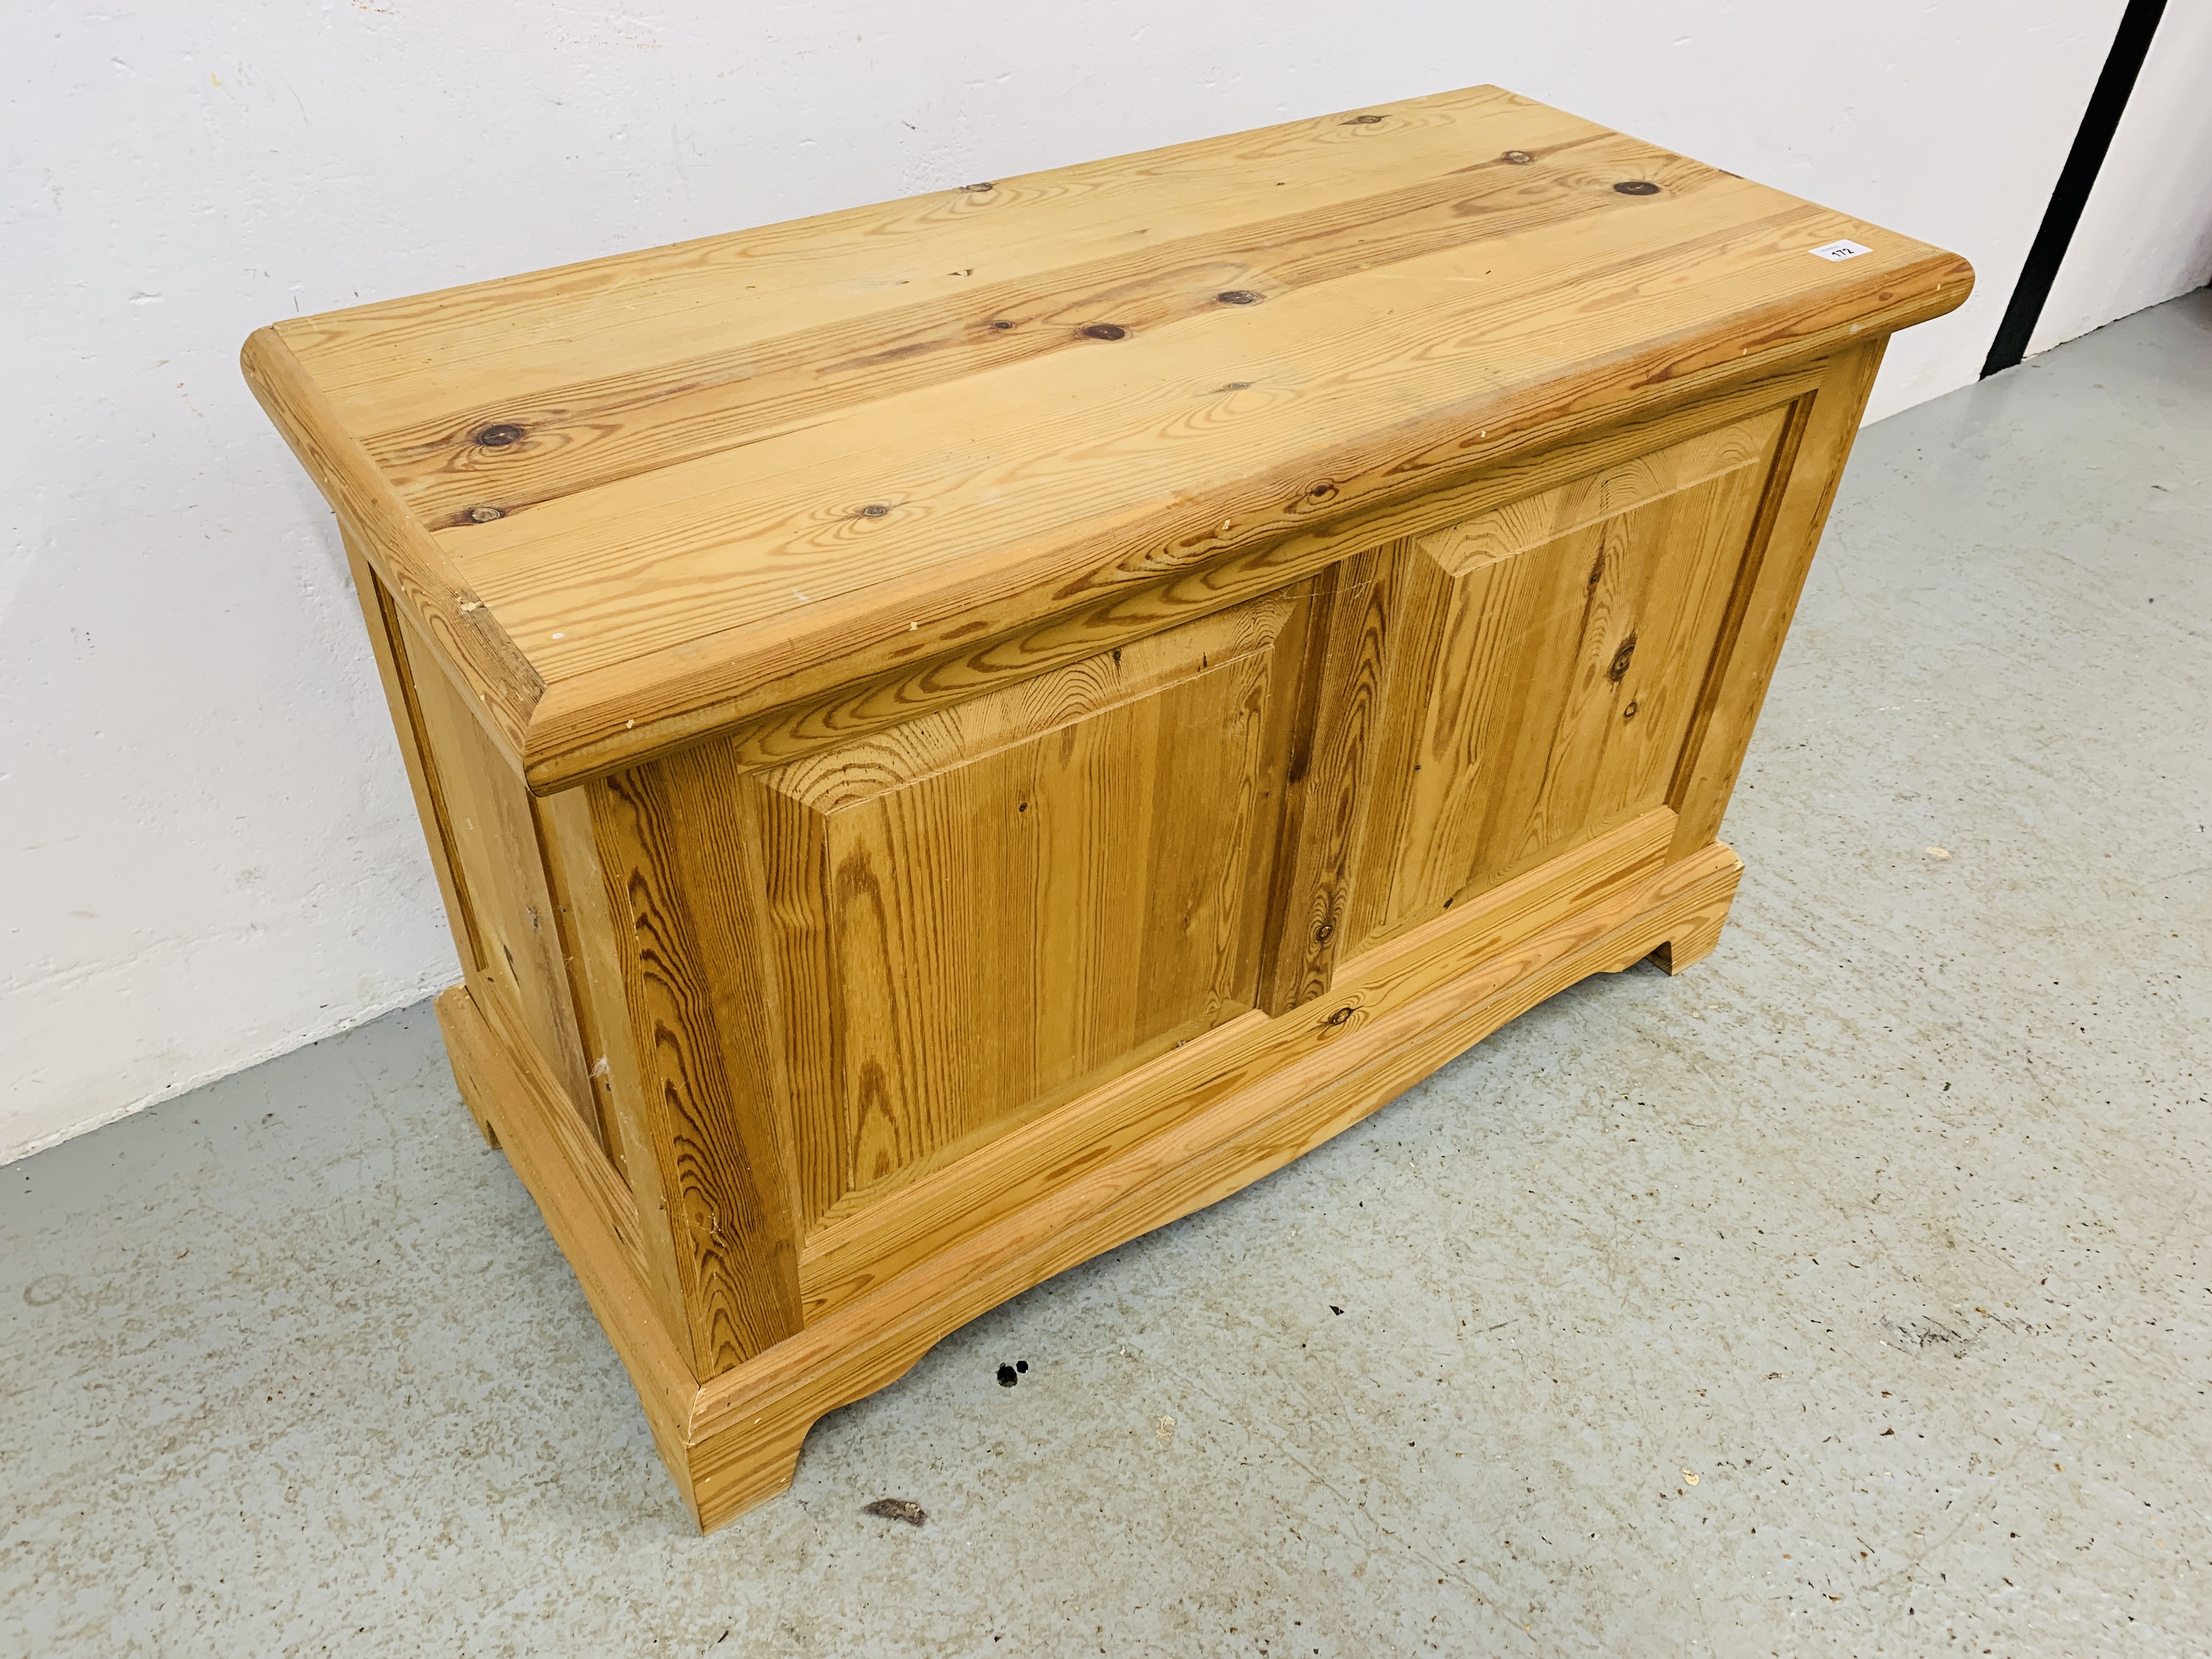 A SOLID WAXED PINE BLANKET BOX - W 94CM. D 42CM. H 62CM. - Image 3 of 7